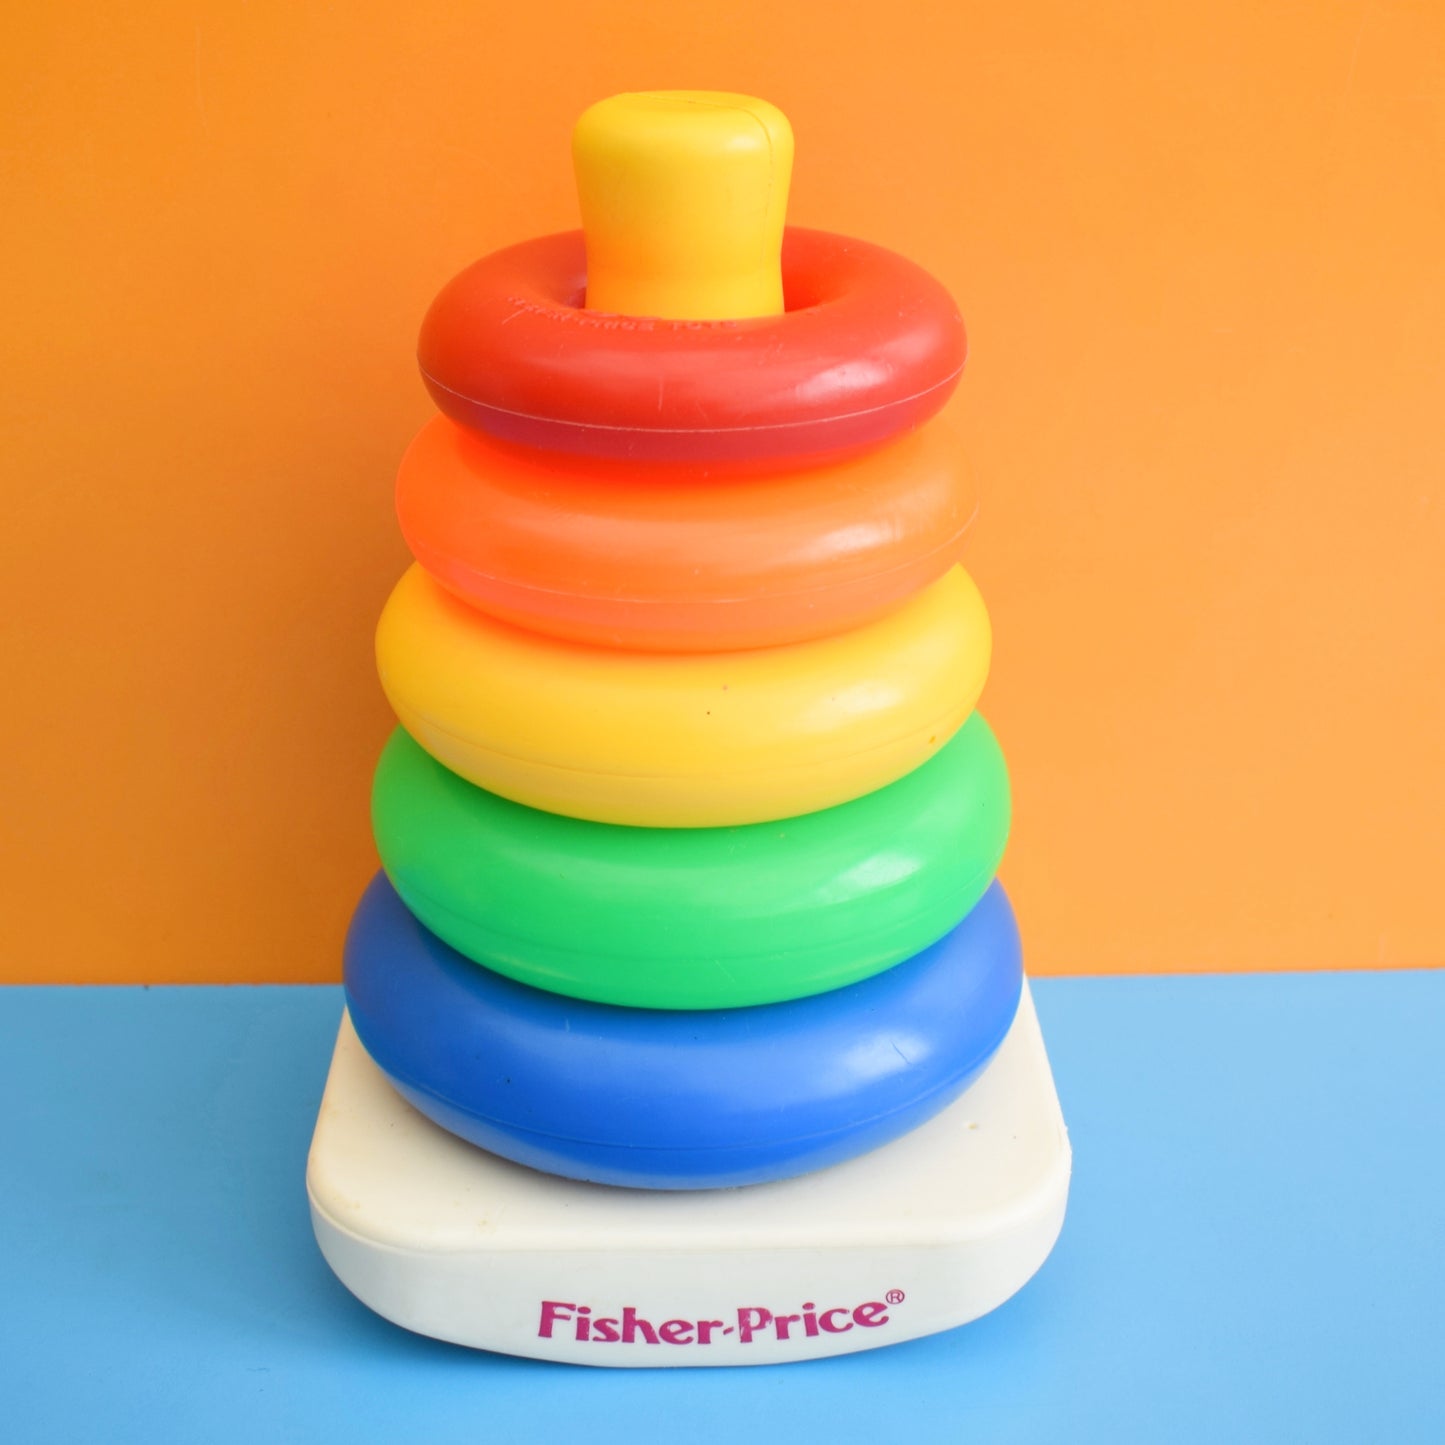 Vintage 1970s Fisher Price Plastic Stacking Toy - Rainbow